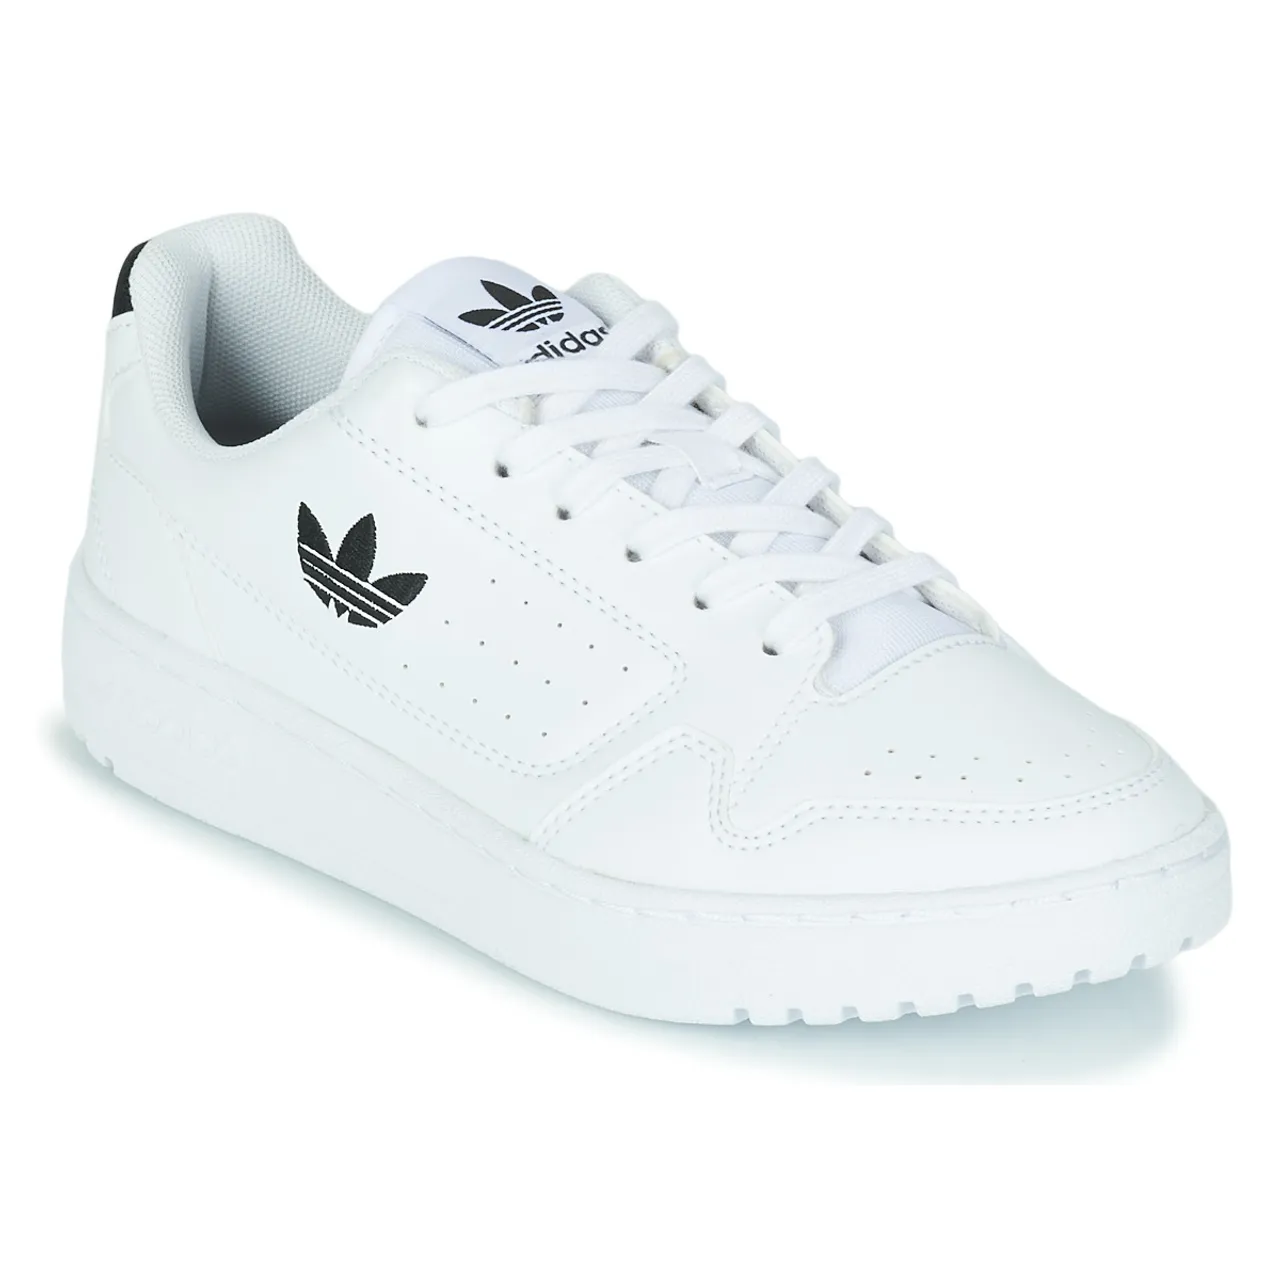 adidas  NY 92 J  boys's Children's Shoes (Trainers) in White